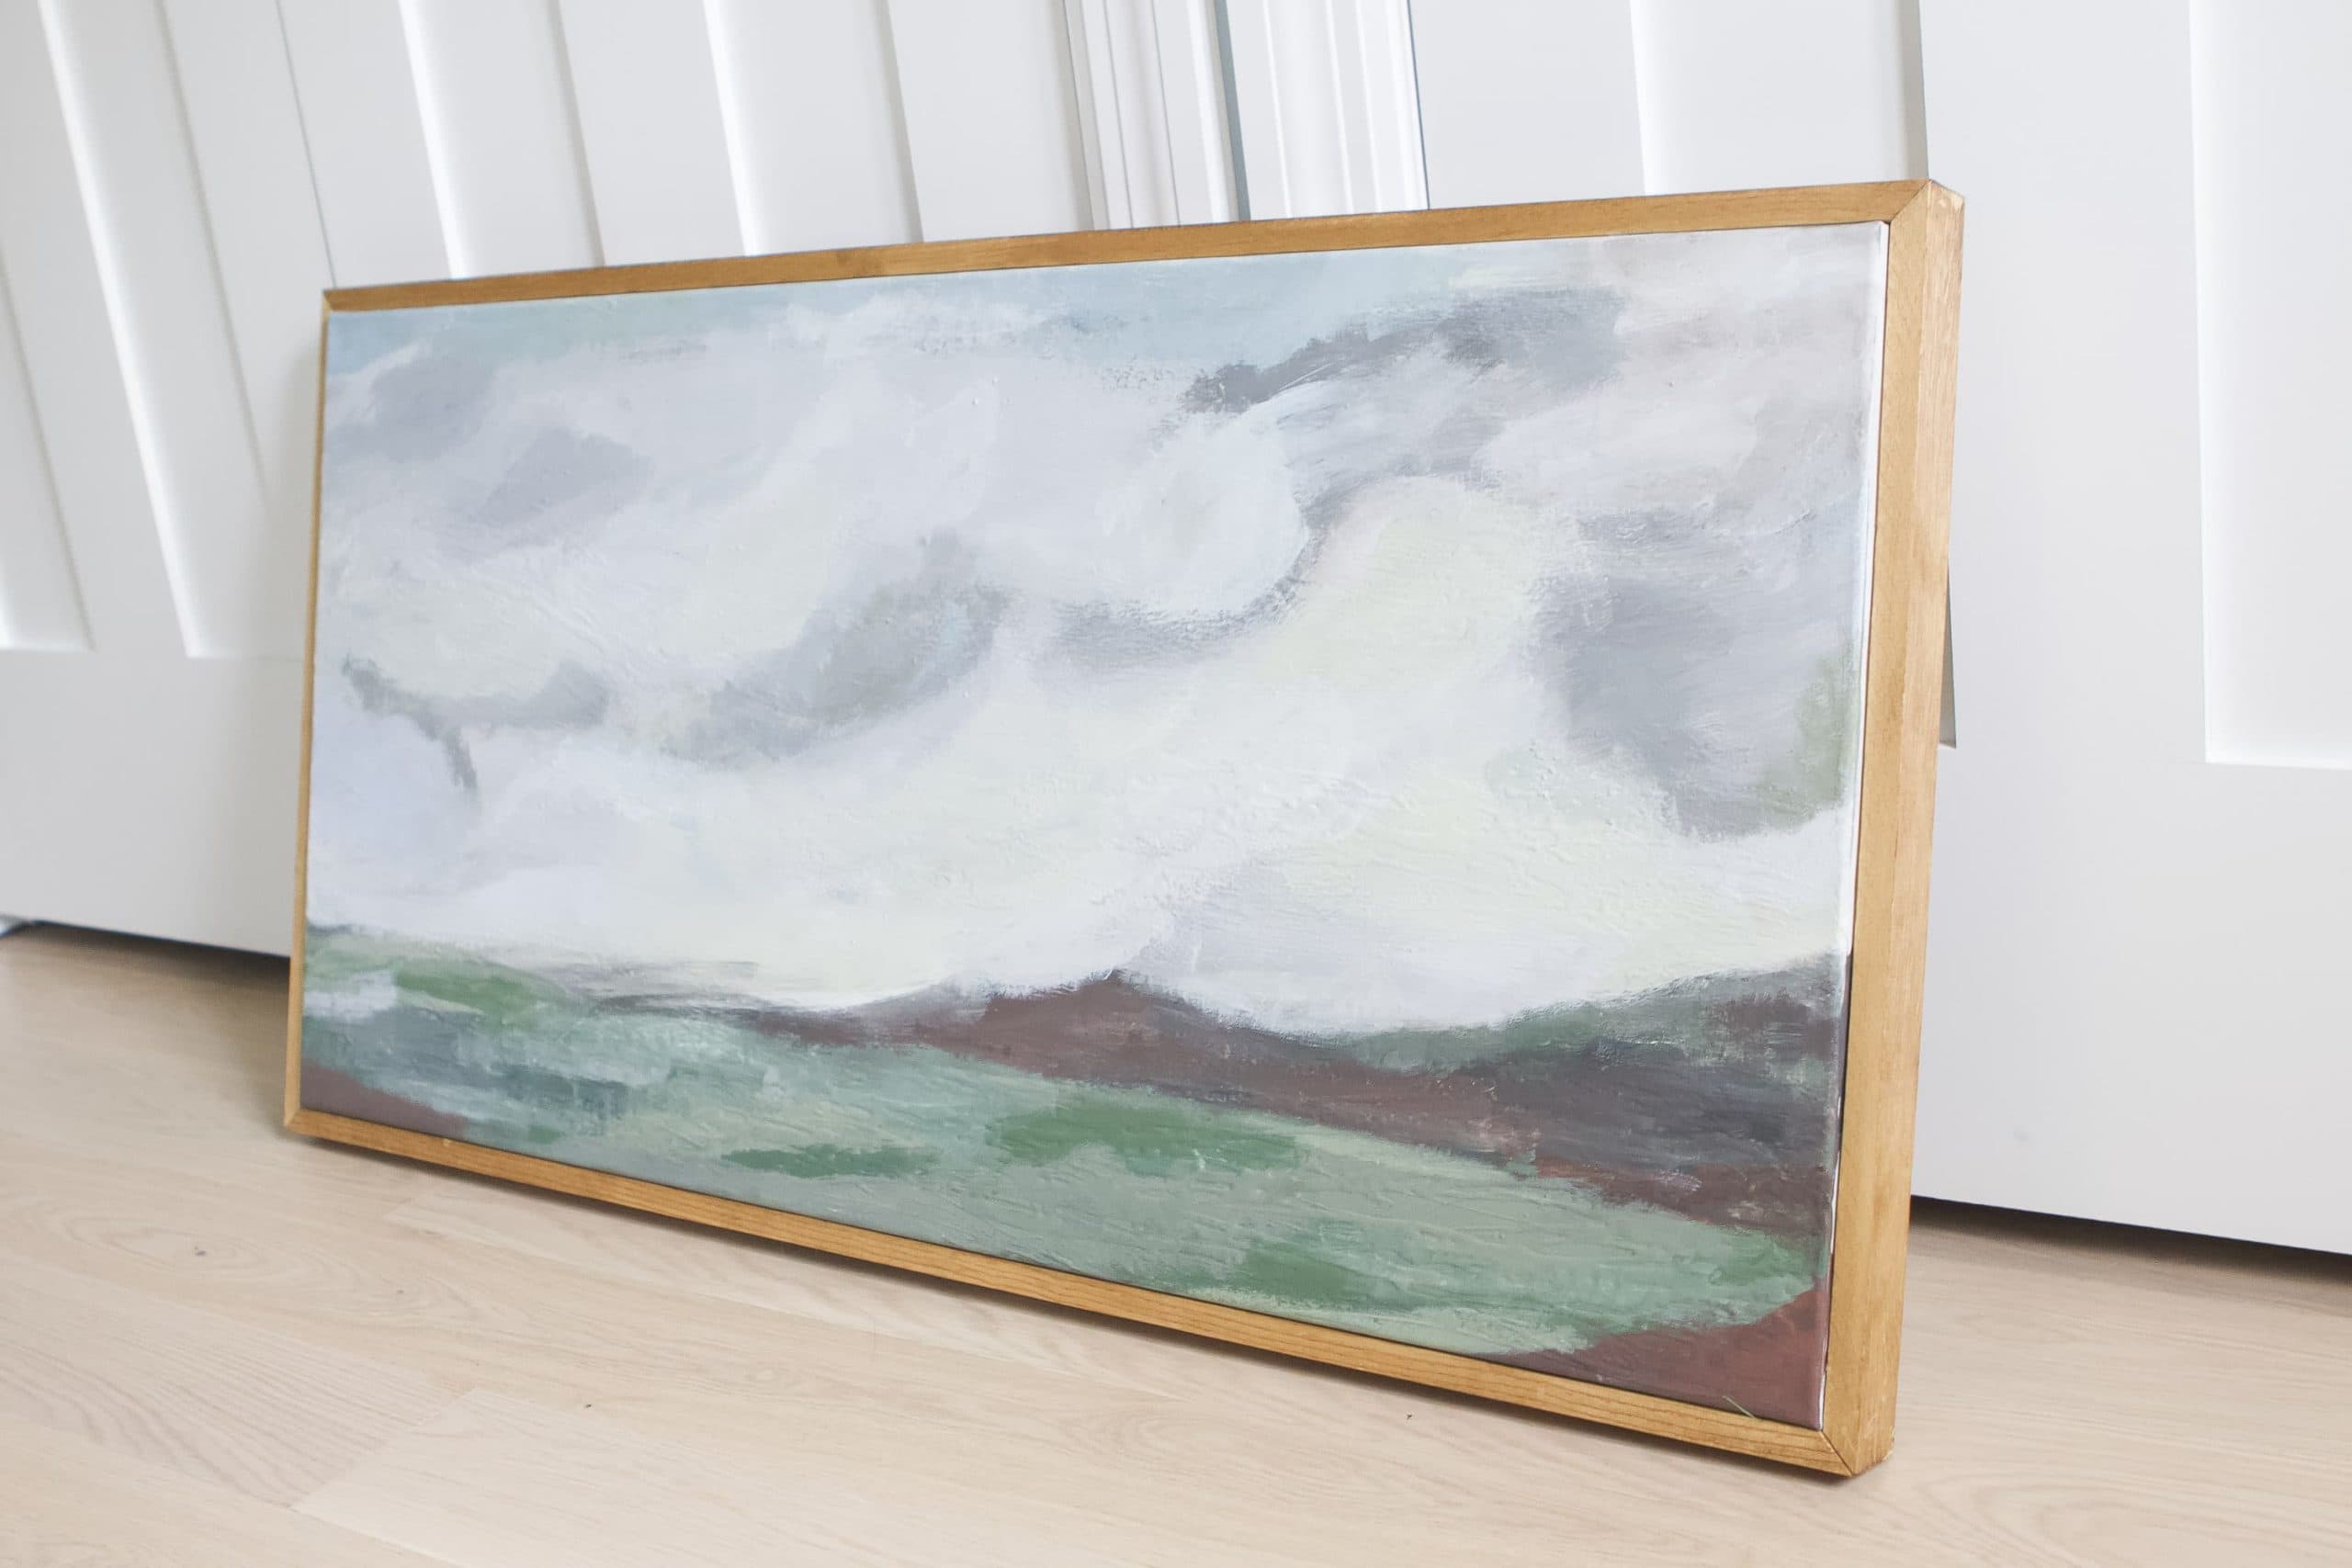 How to make a DIY canvas frame for your home